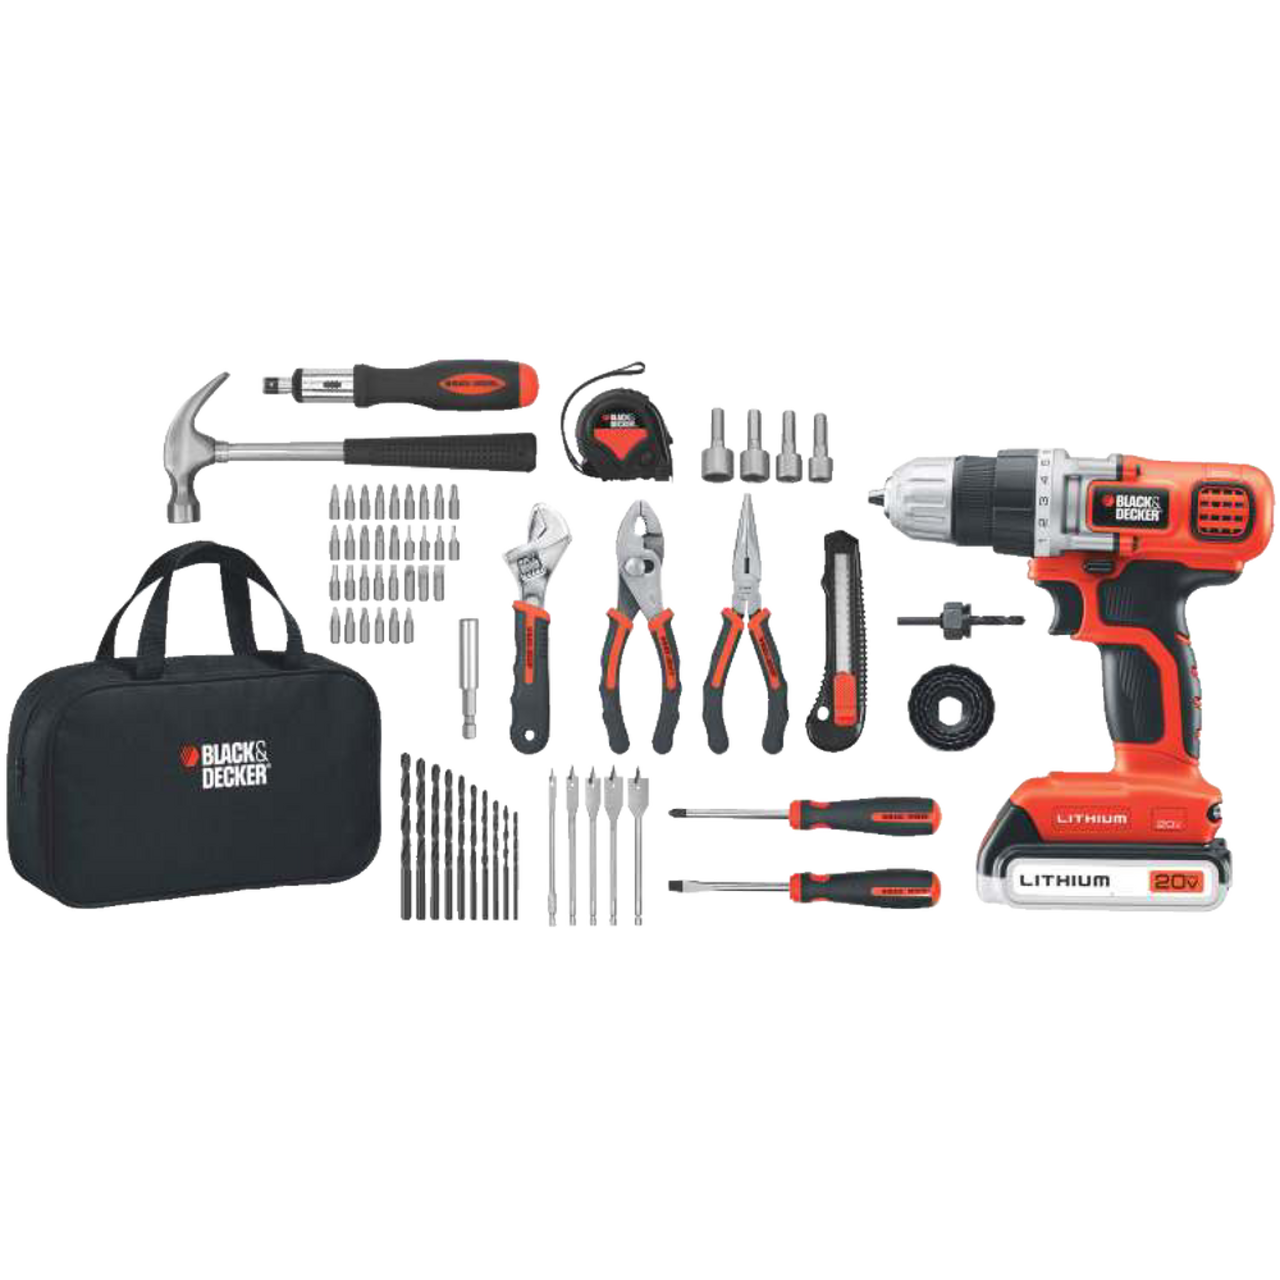 https://media-www.canadiantire.ca/product/fixing/tools/portable-power-tools/2992512/black-decker-20v-lithium-drill-project-kit-c17517a5-00f2-444b-a614-4701374f3e59.png?imdensity=1&imwidth=640&impolicy=mZoom